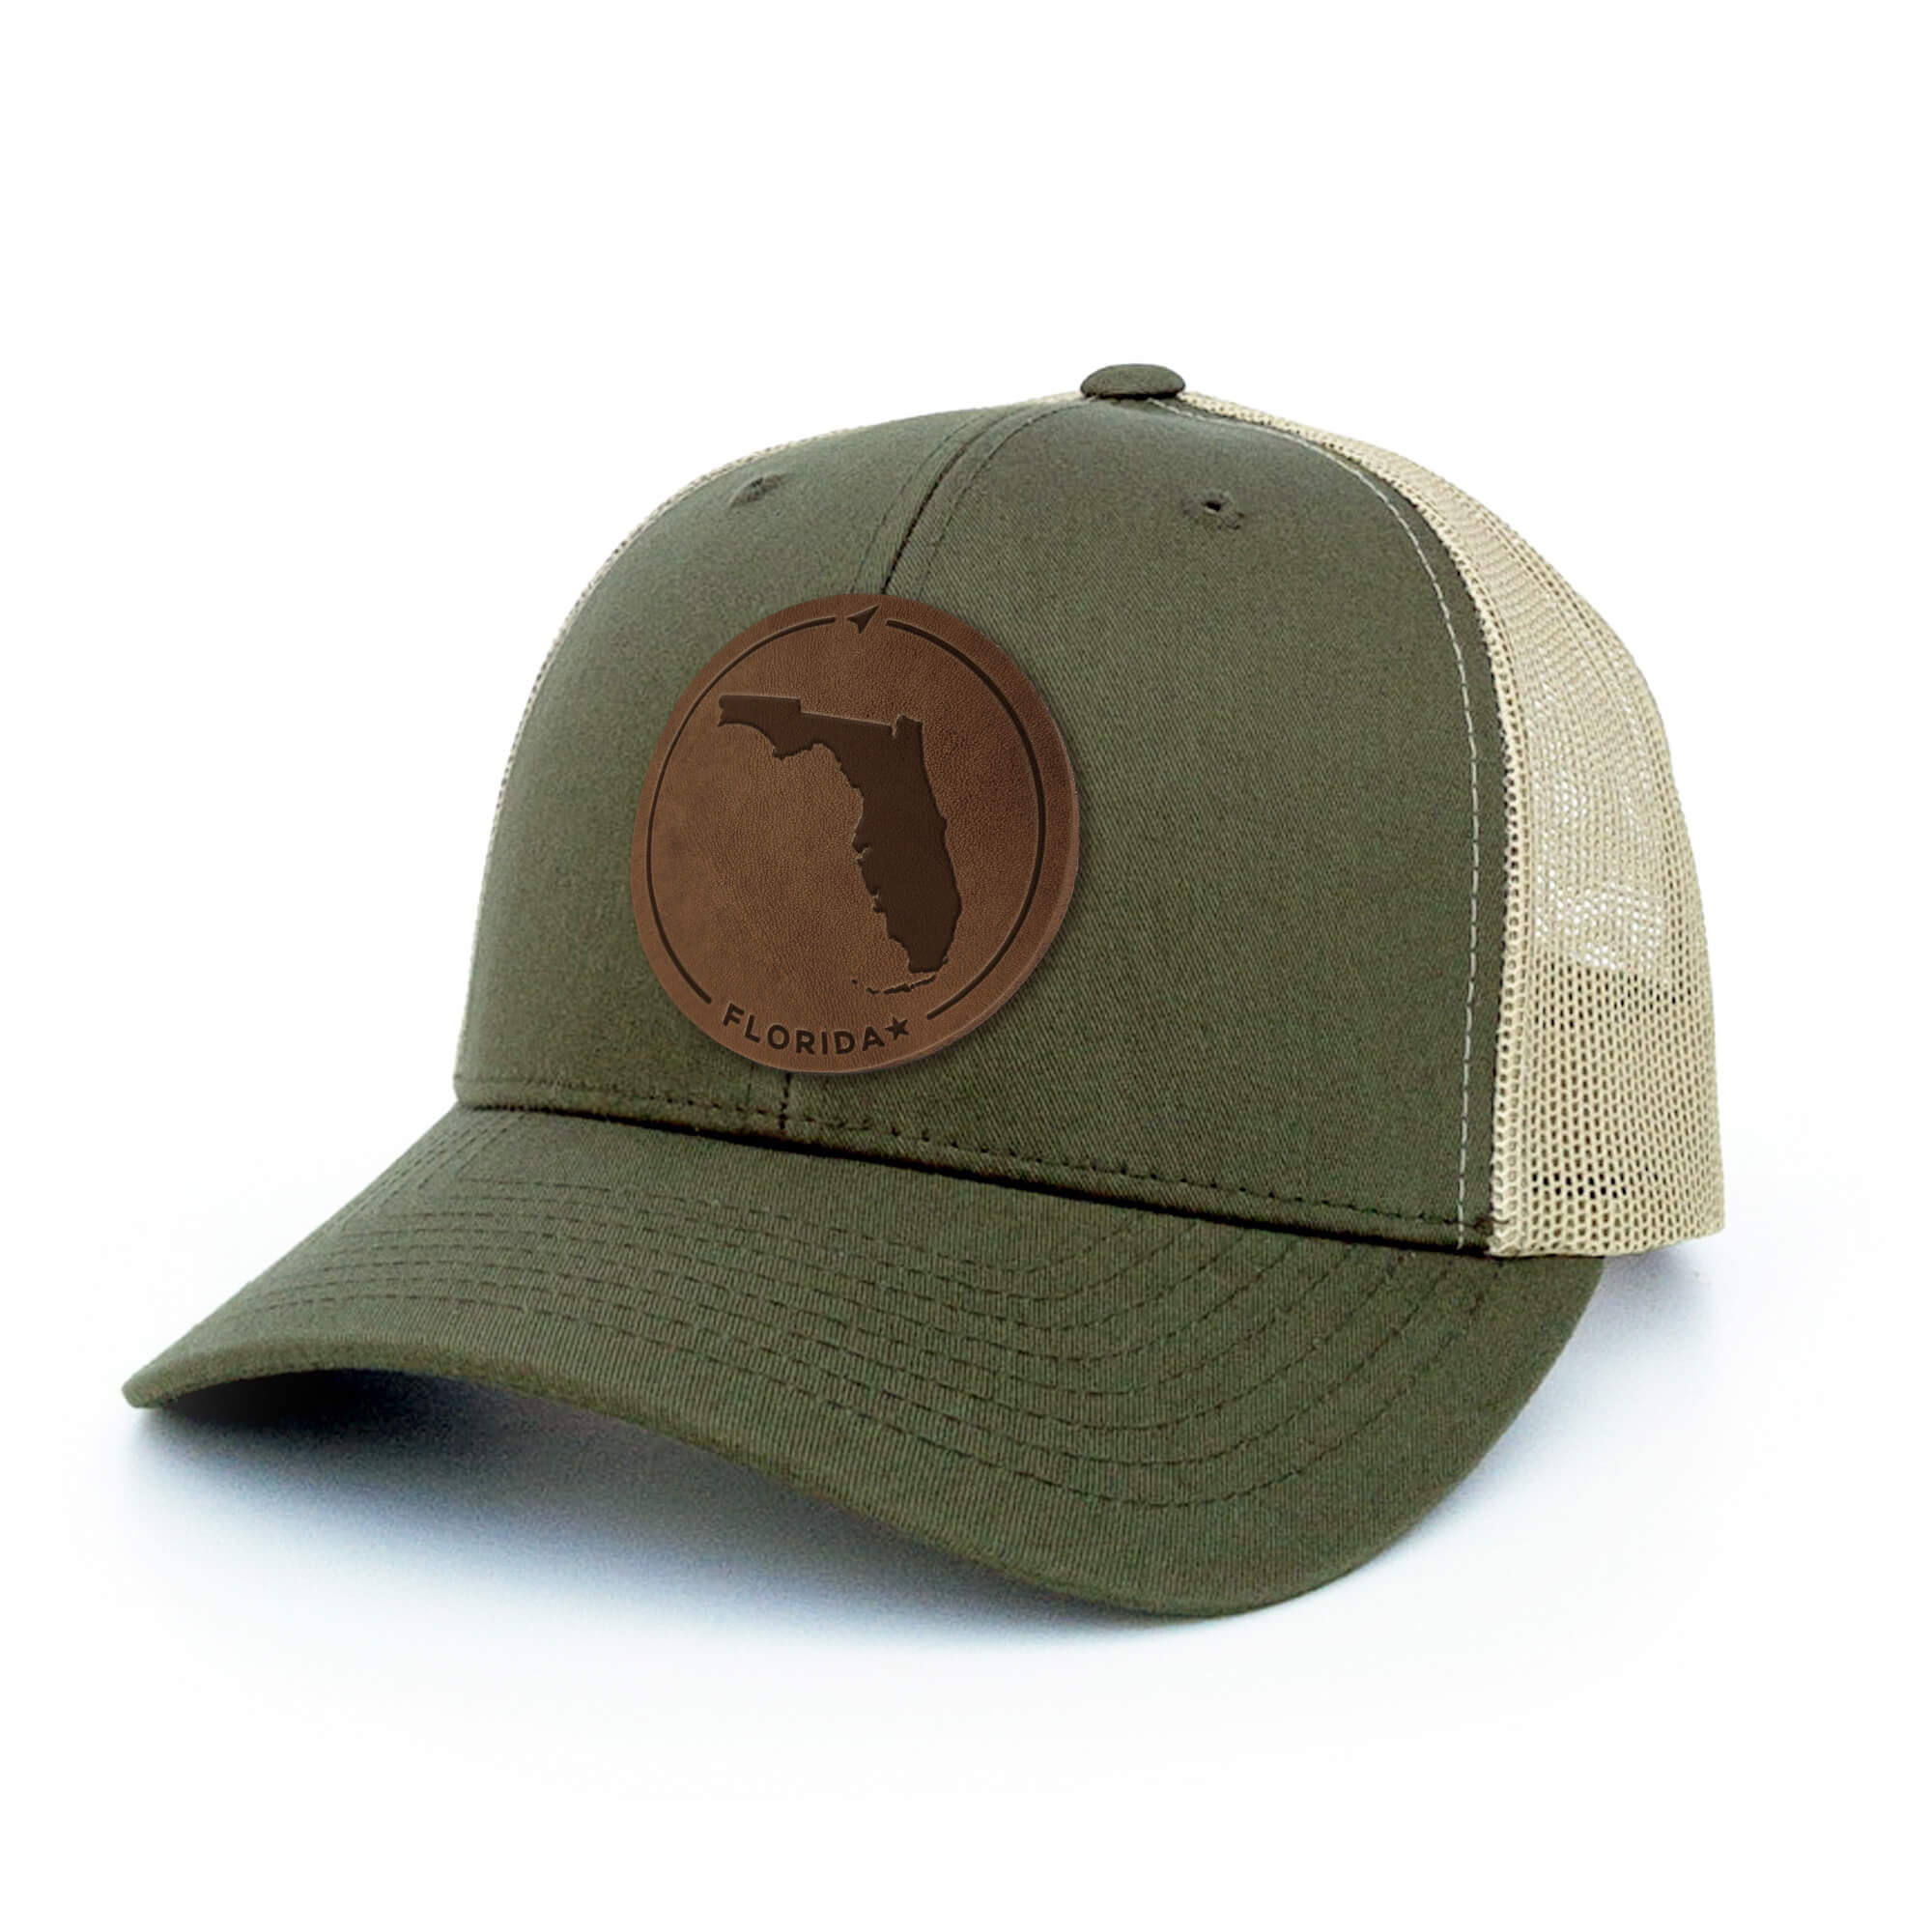 Moss Green and khaki trucker hat with full-grain leather patch of Florida | BLACK-003-010, CHARC-003-010, NAVY-003-010, HGREY-003-010, MOSS-003-010, BROWN-003-010